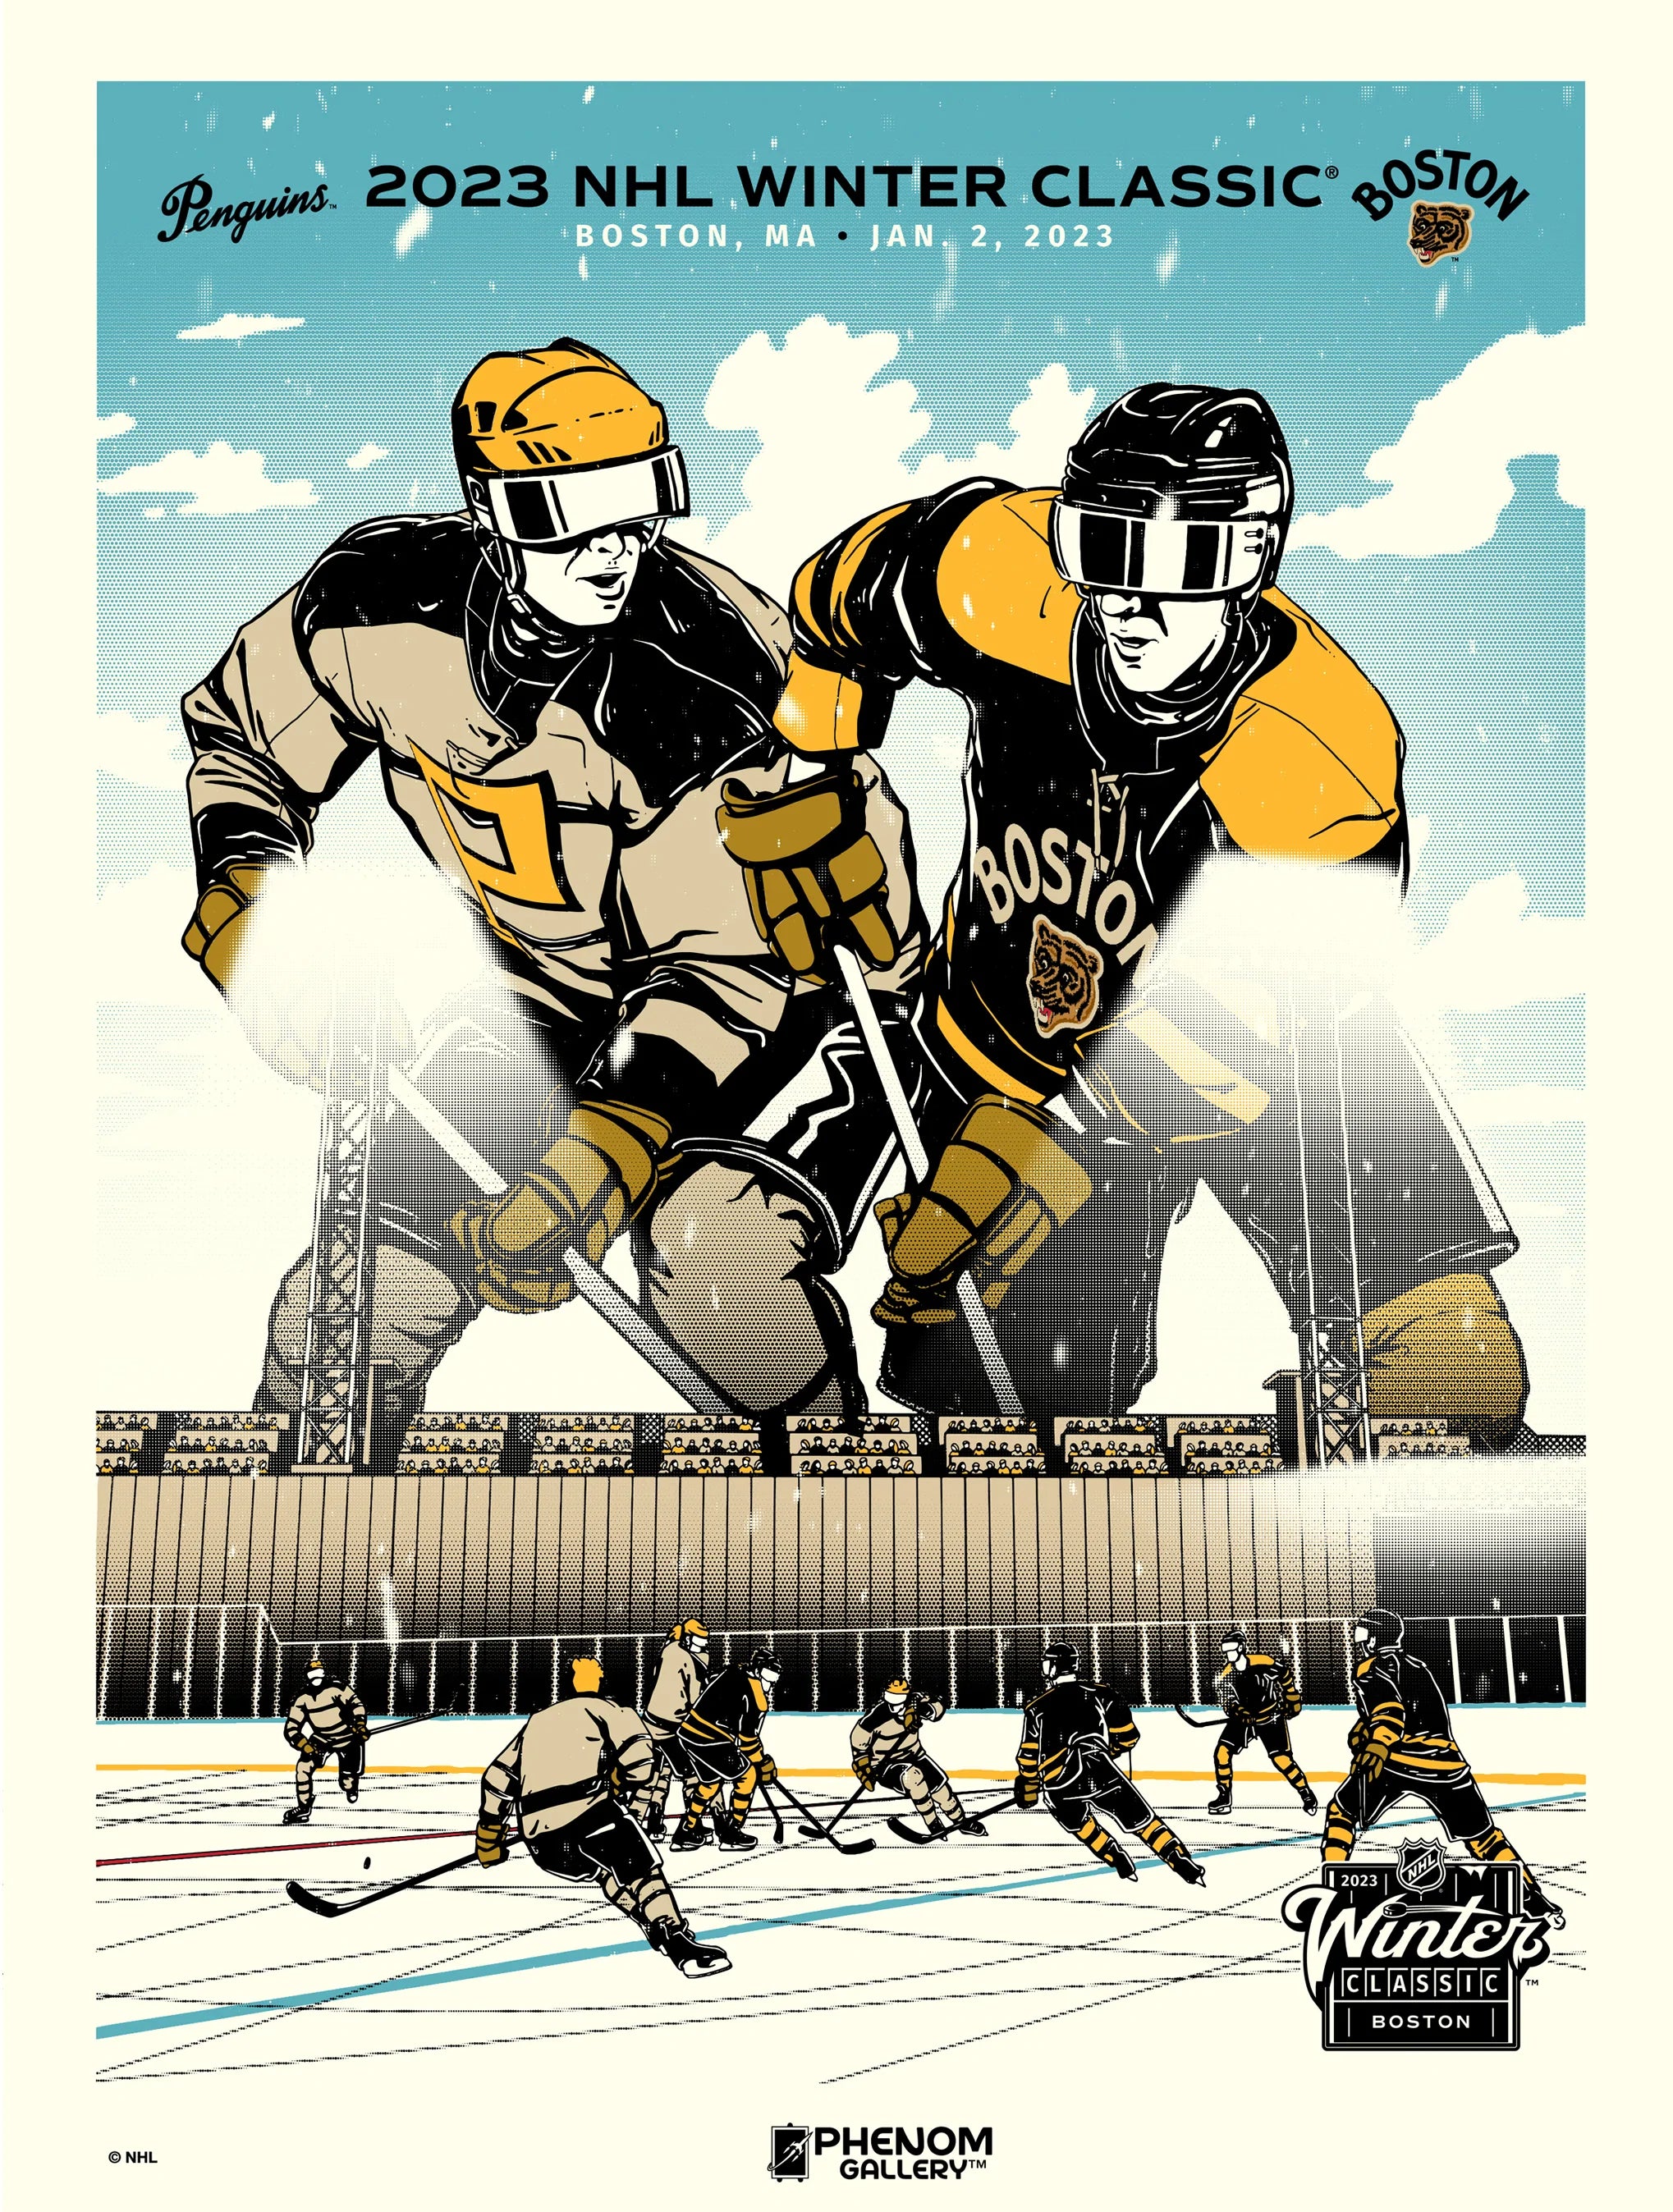 NHL - The 2023 Discover #WinterClassic is headed back to Fenway Park,  featuring the Boston Bruins and Pittsburgh Penguins! ❄️ Be sure to catch it  on NHL on TNT!